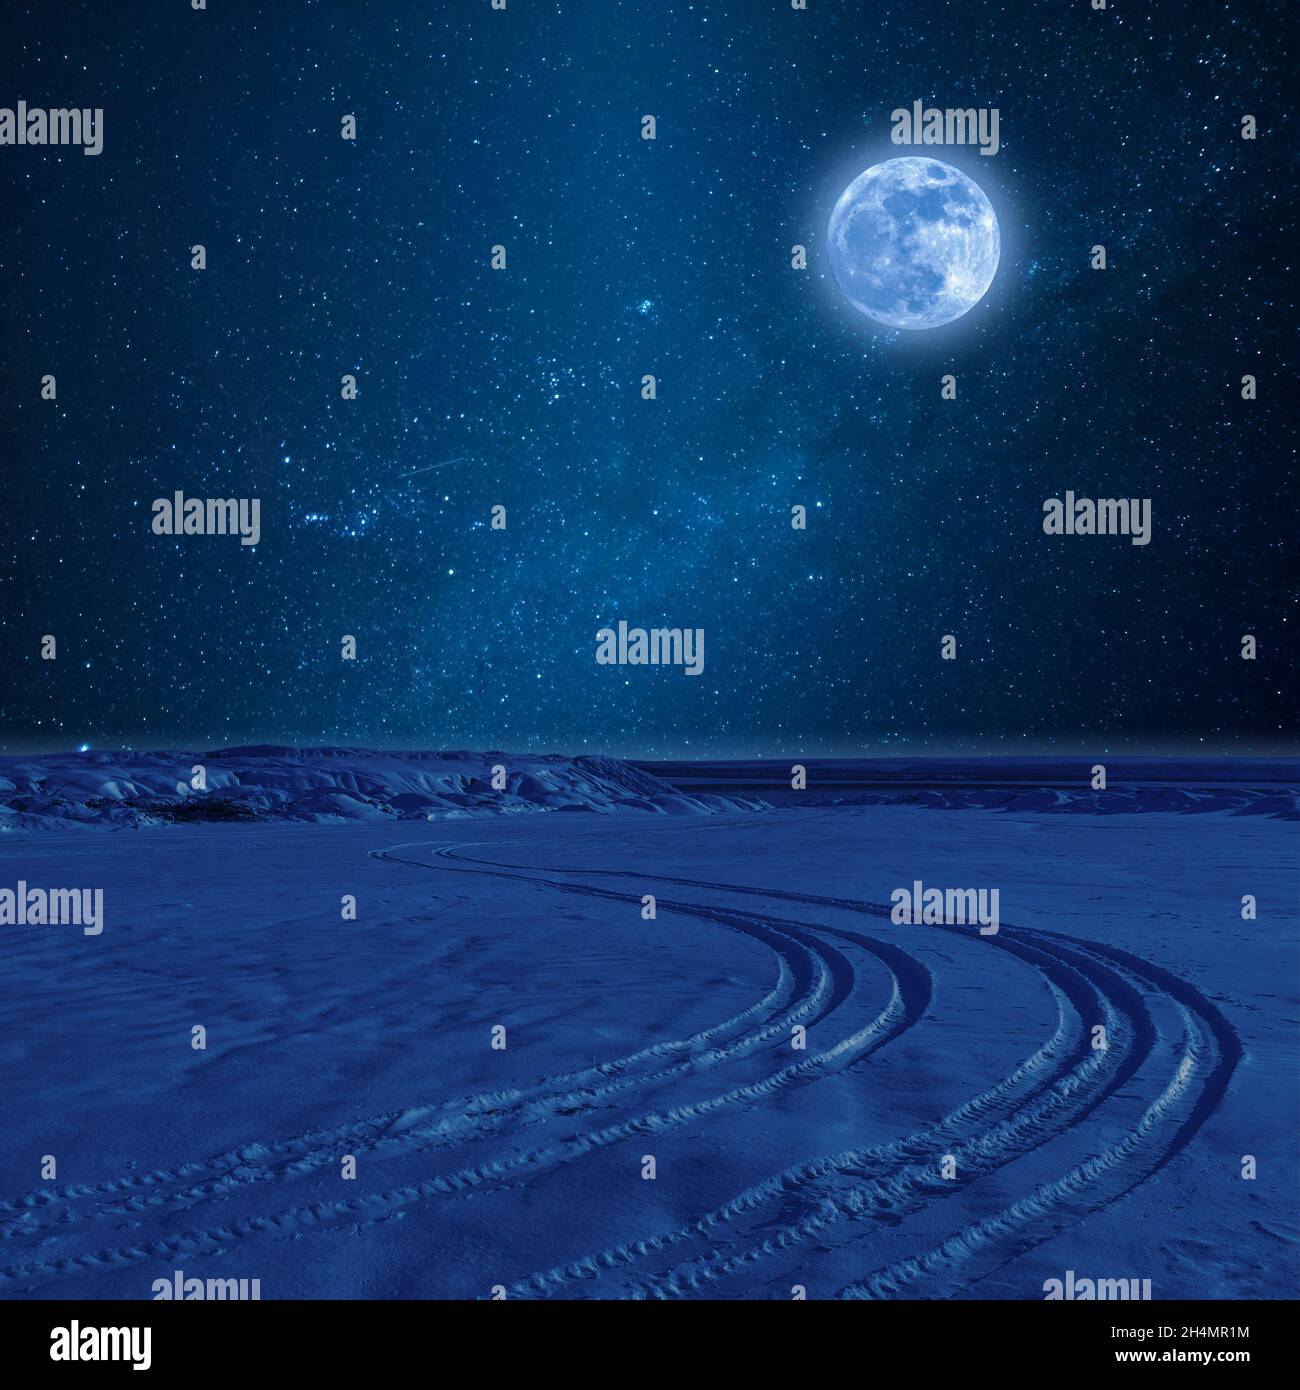 Night landscape with tire trace on snow, stars and full moon in sky Stock Photo